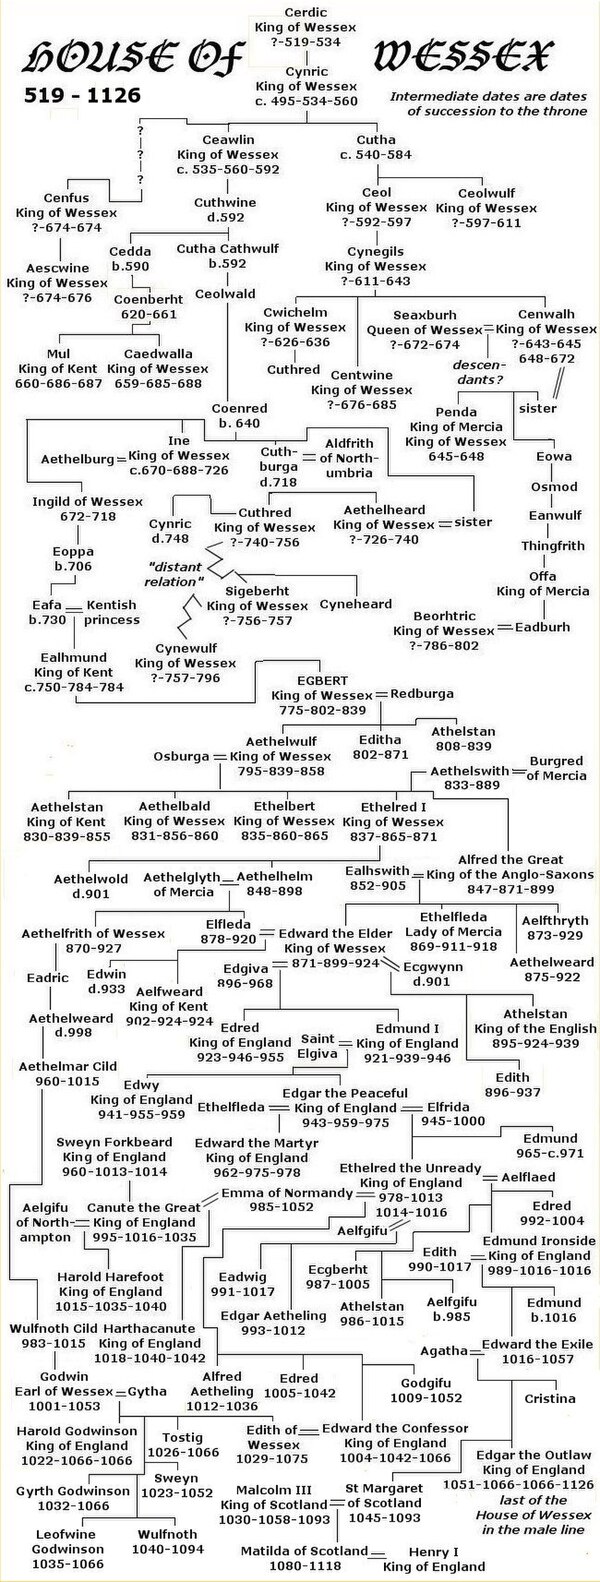 House of Wessex Family Tree